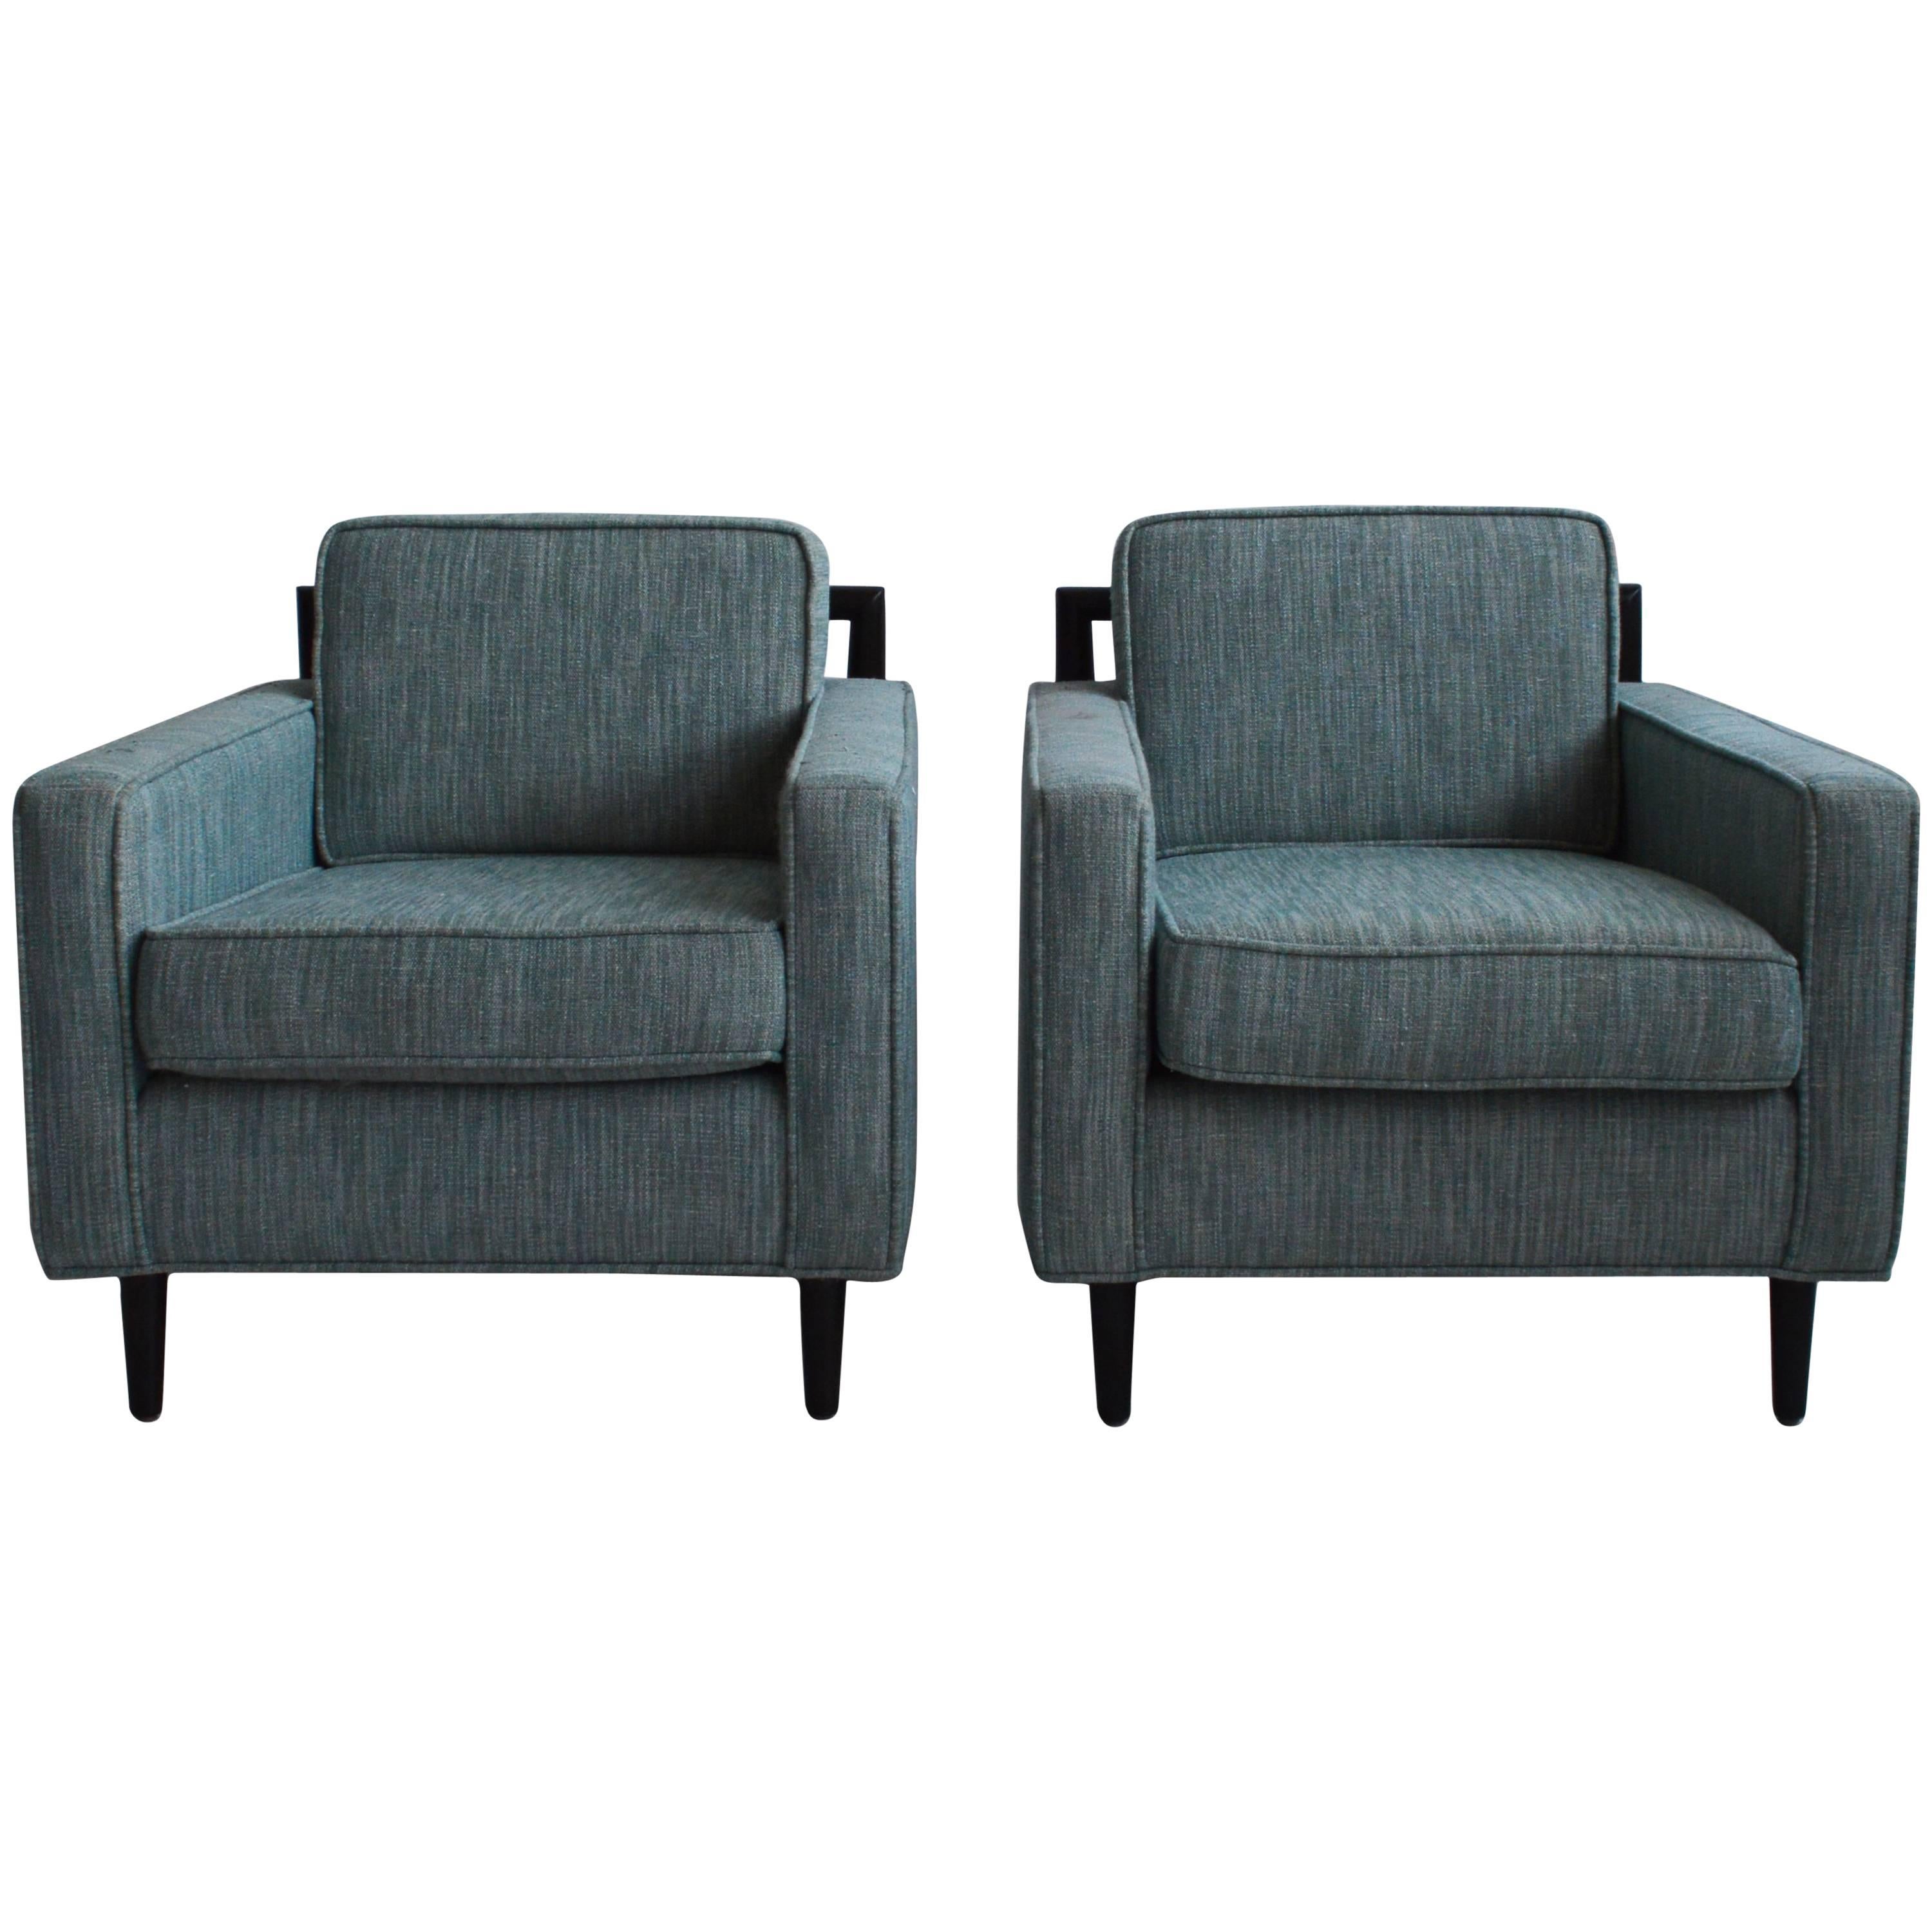 Pair of Mid-Century Inspired Lounge Chairs, 21st Century, American For Sale